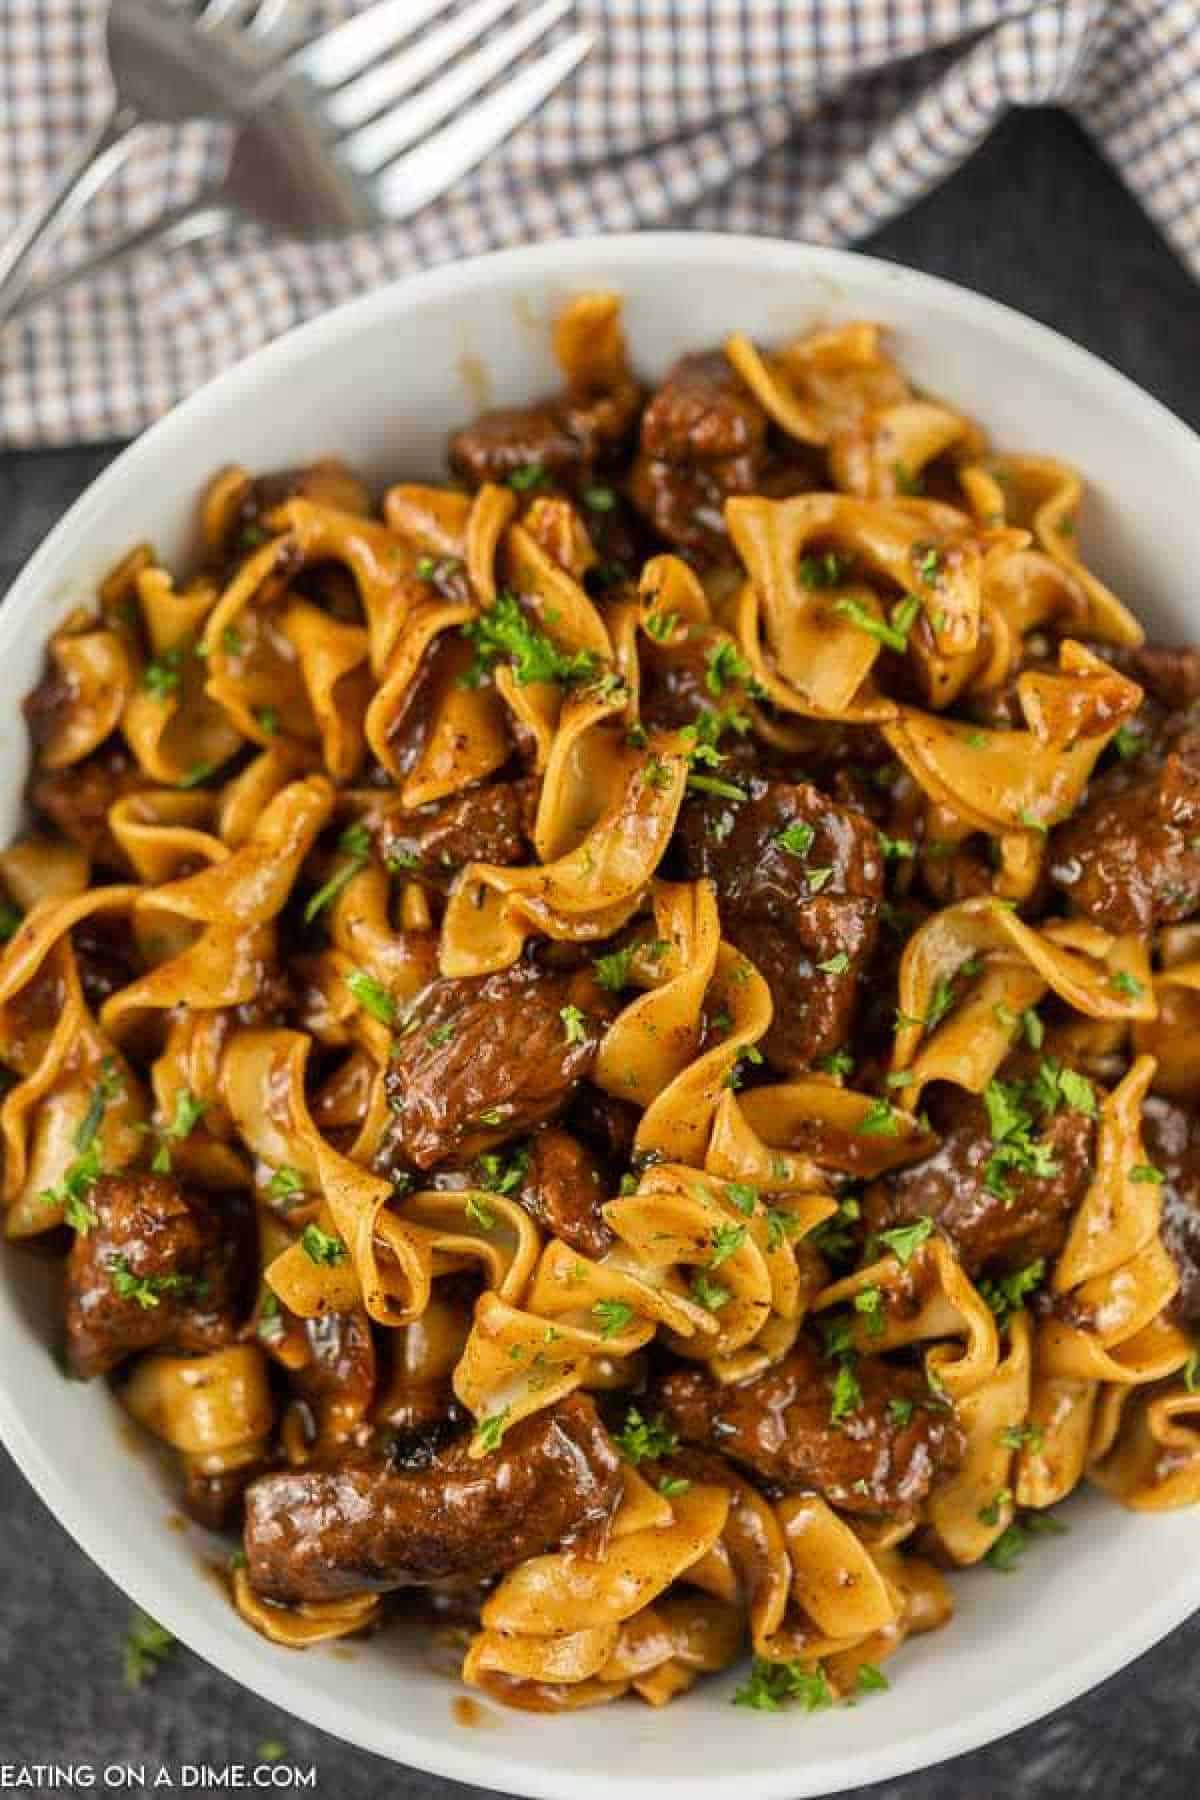 EASY BEEF AND NOODLES RECIPE